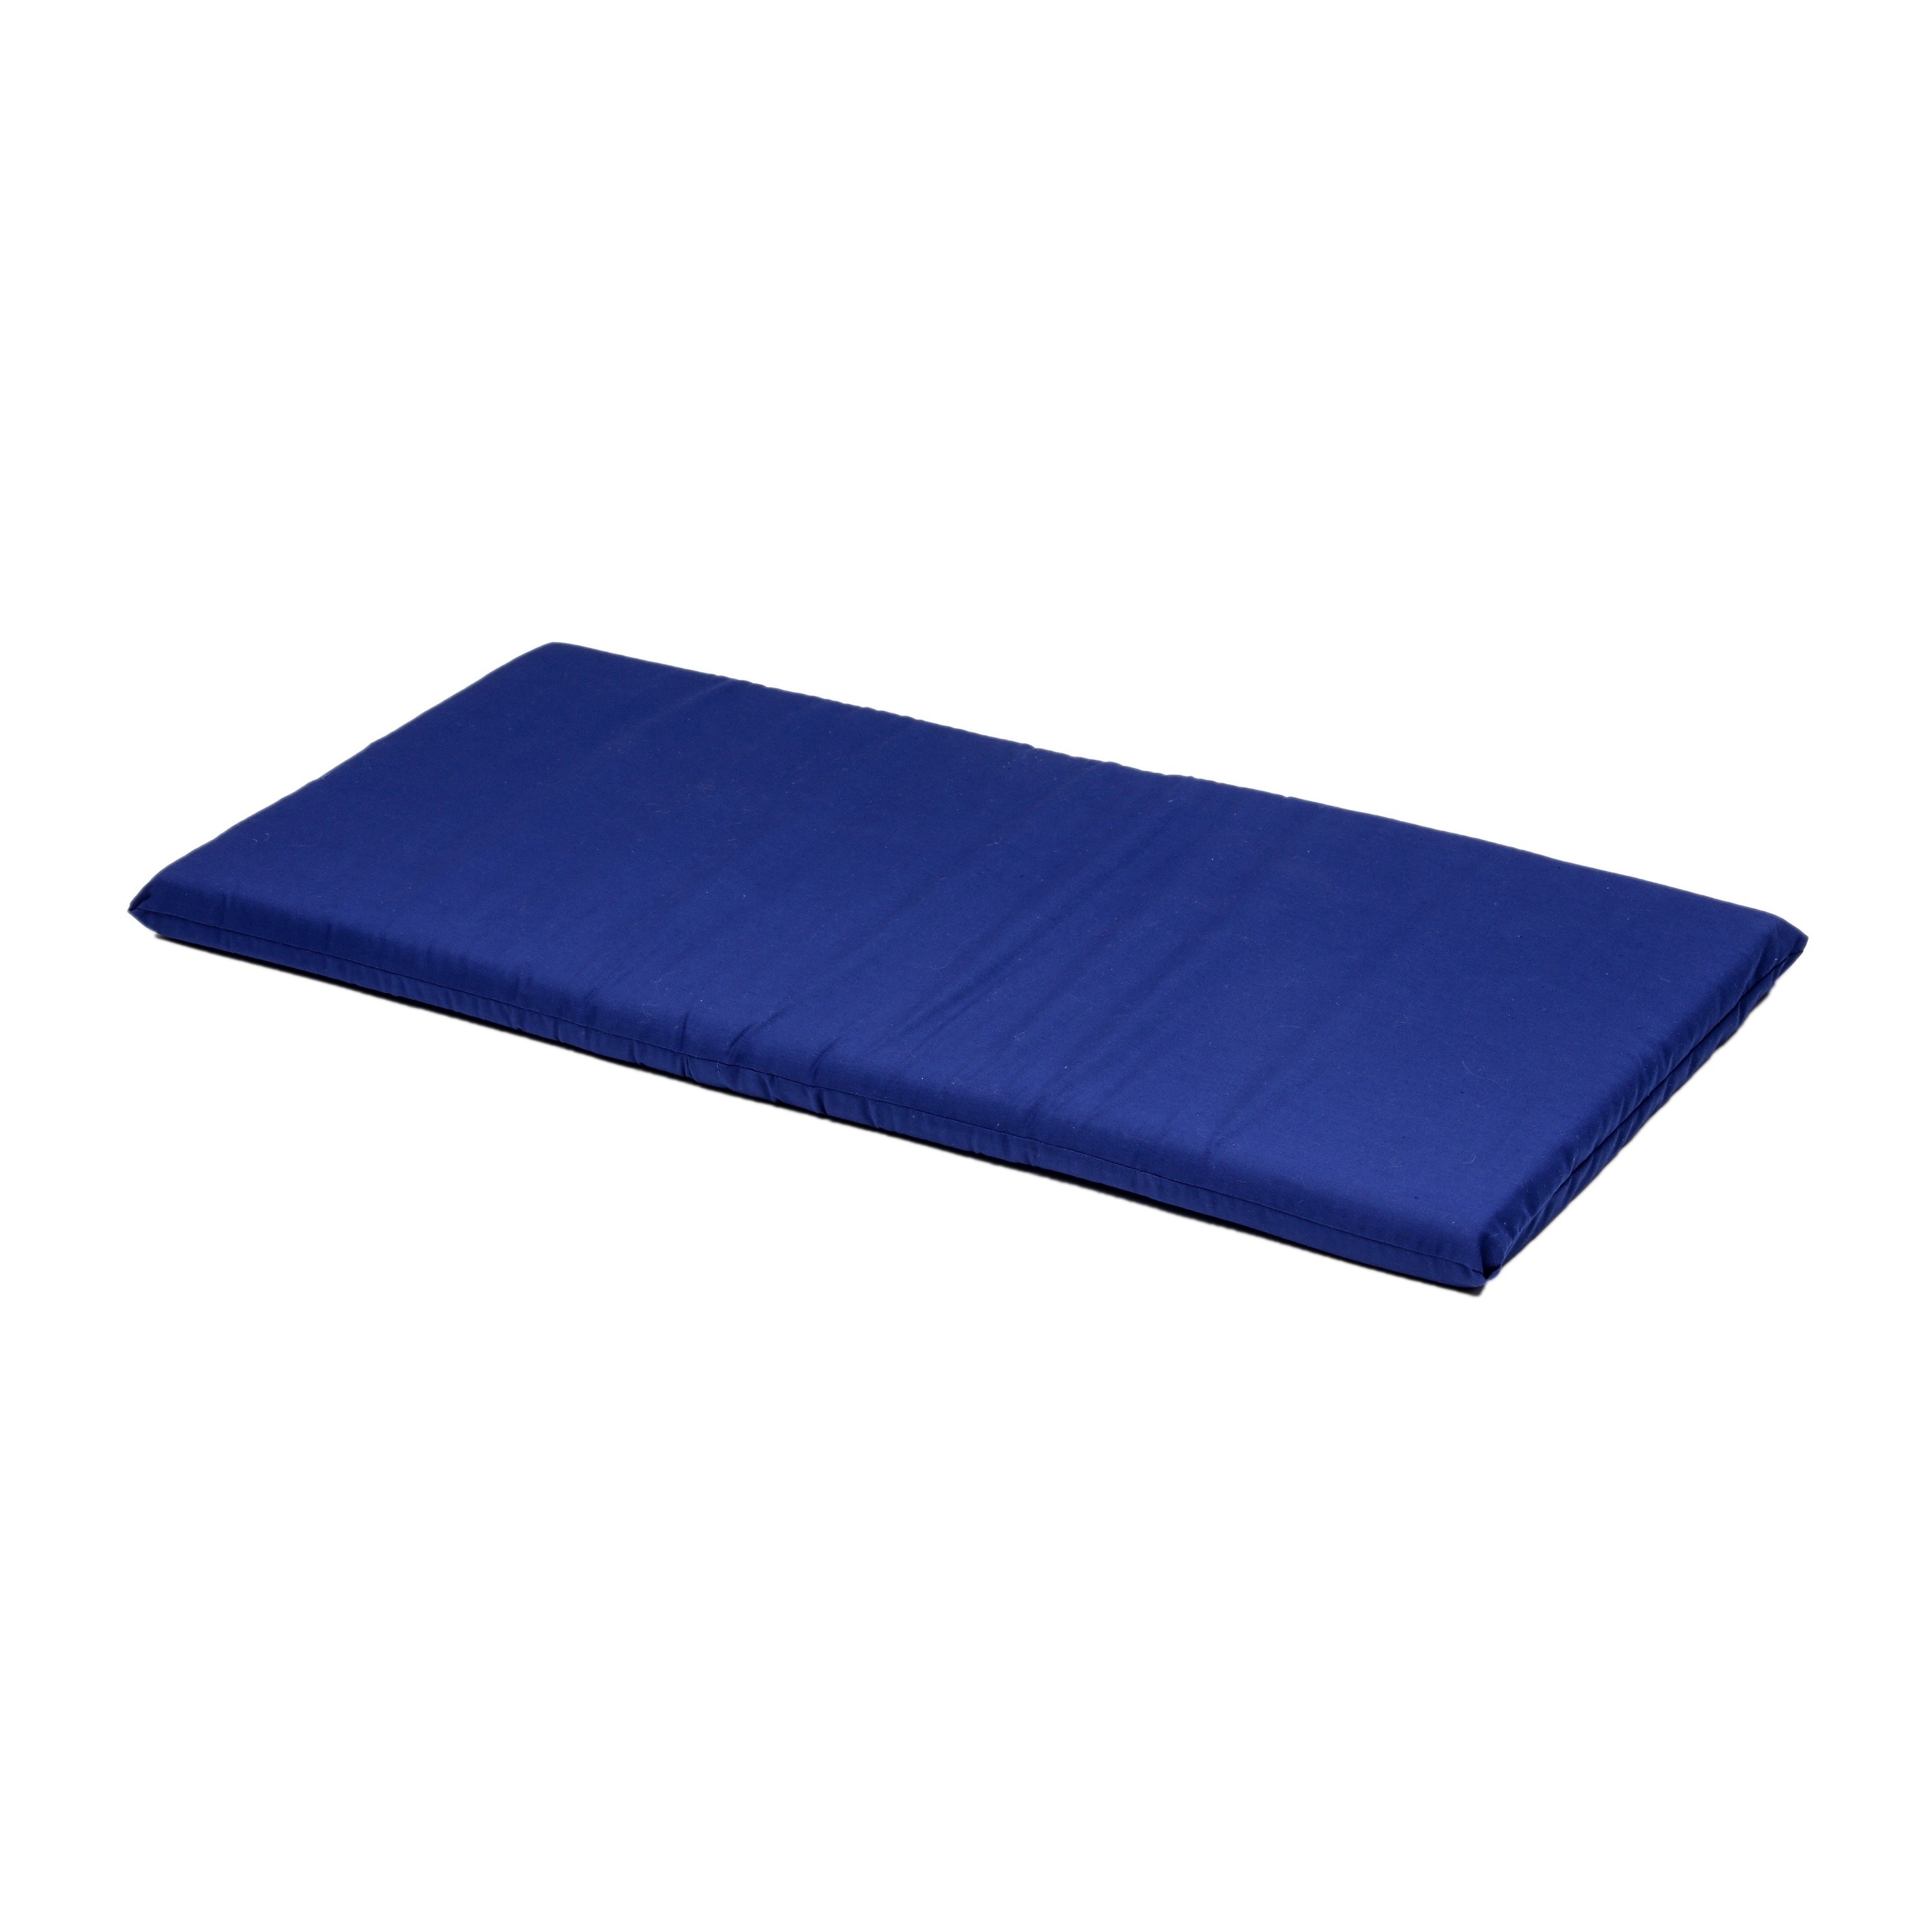 06.Large Rectangle Support Pillow